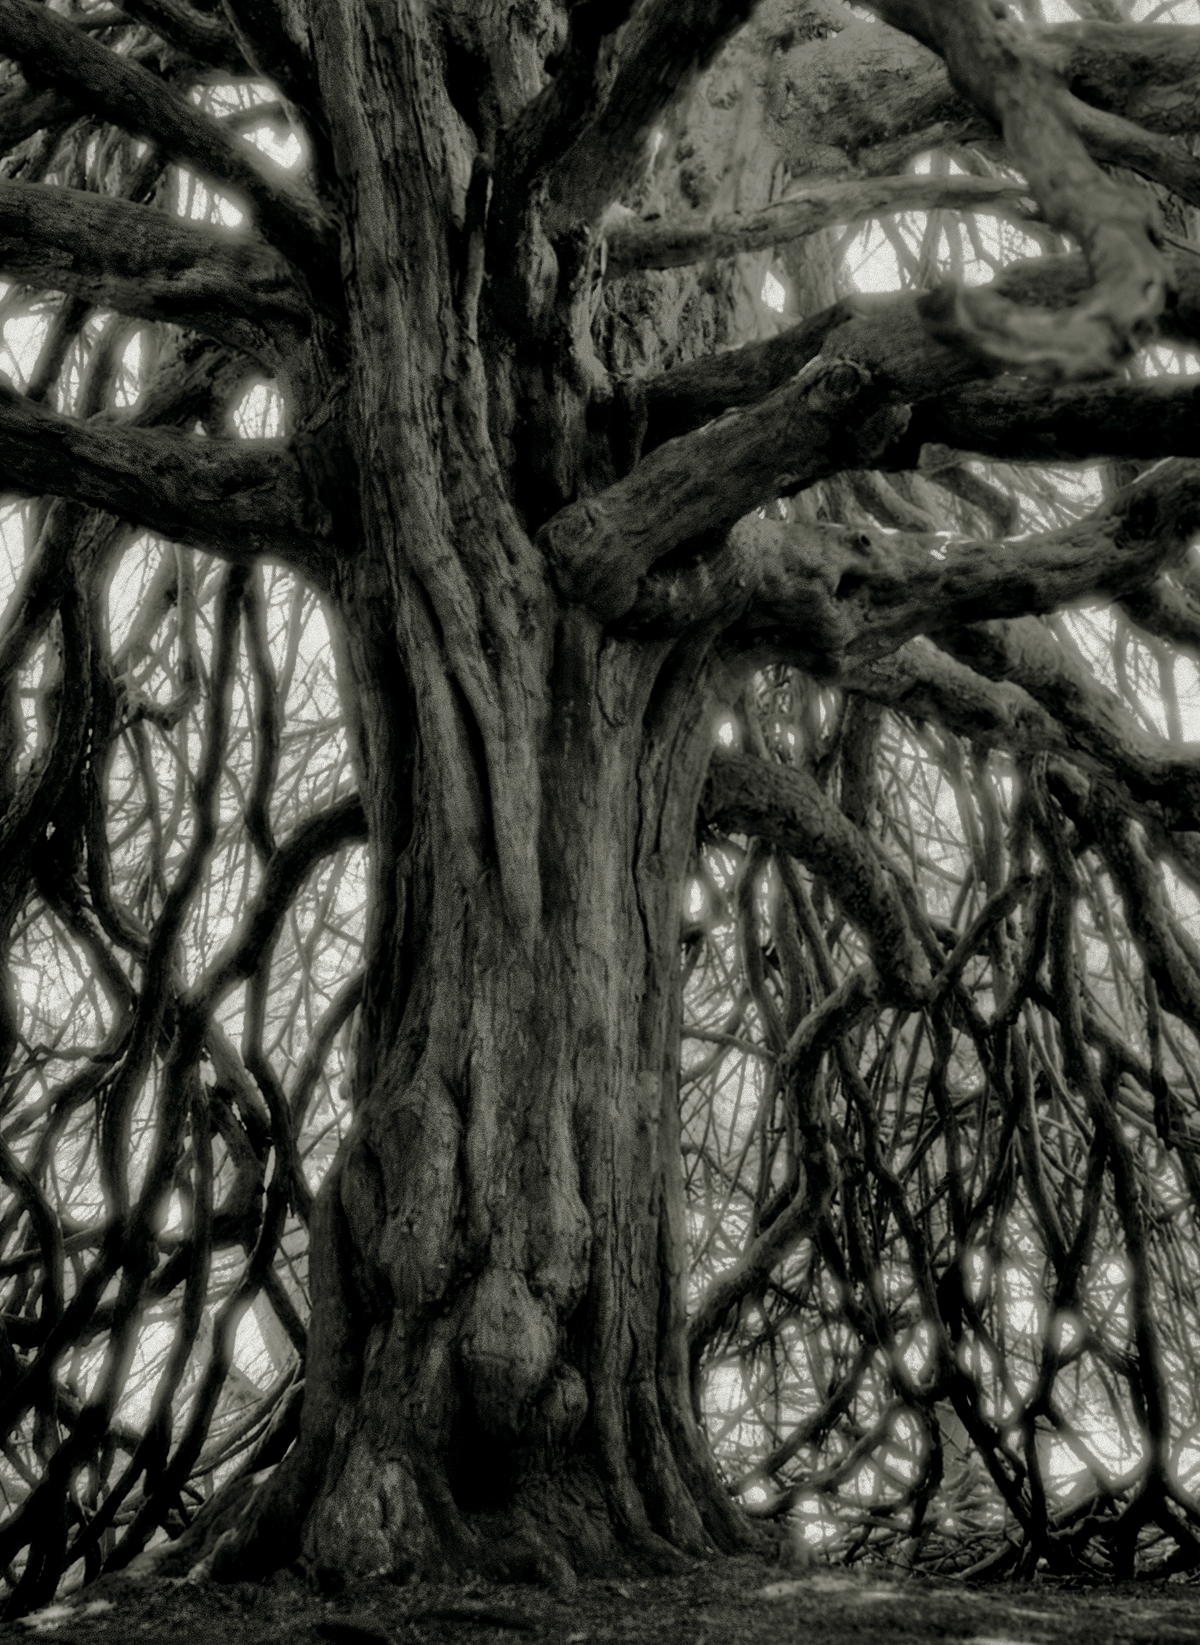 Black-and-white image shows a close-up of a yew tree, with scraggly branches reaching down to the ground.